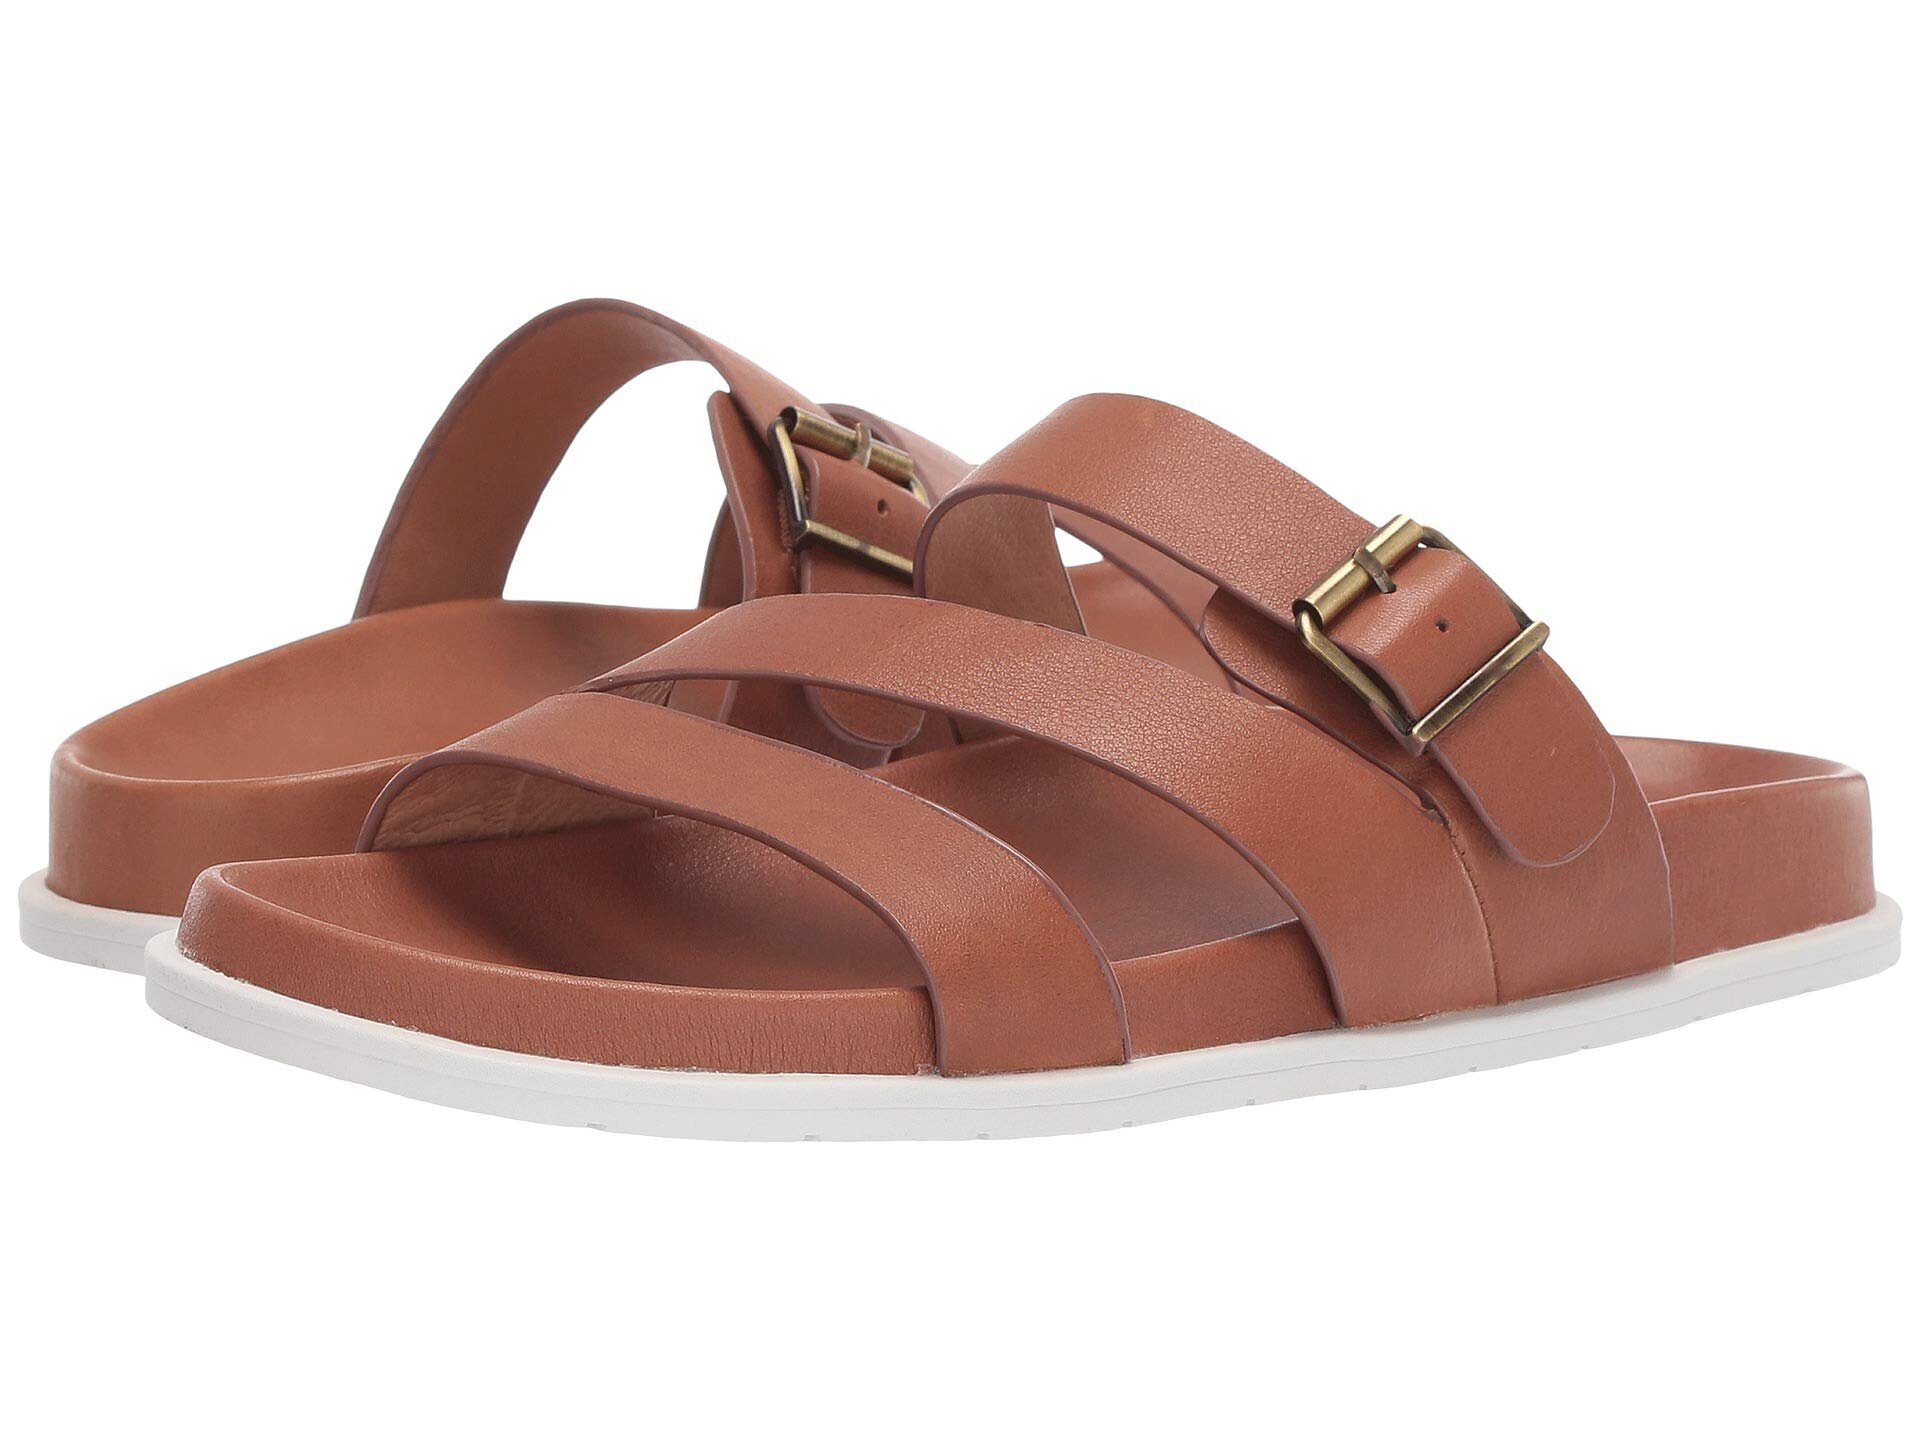 We've Found The Stylish Sandals That Can Withstand Unpredictable Manila  Weather | Metro.Style